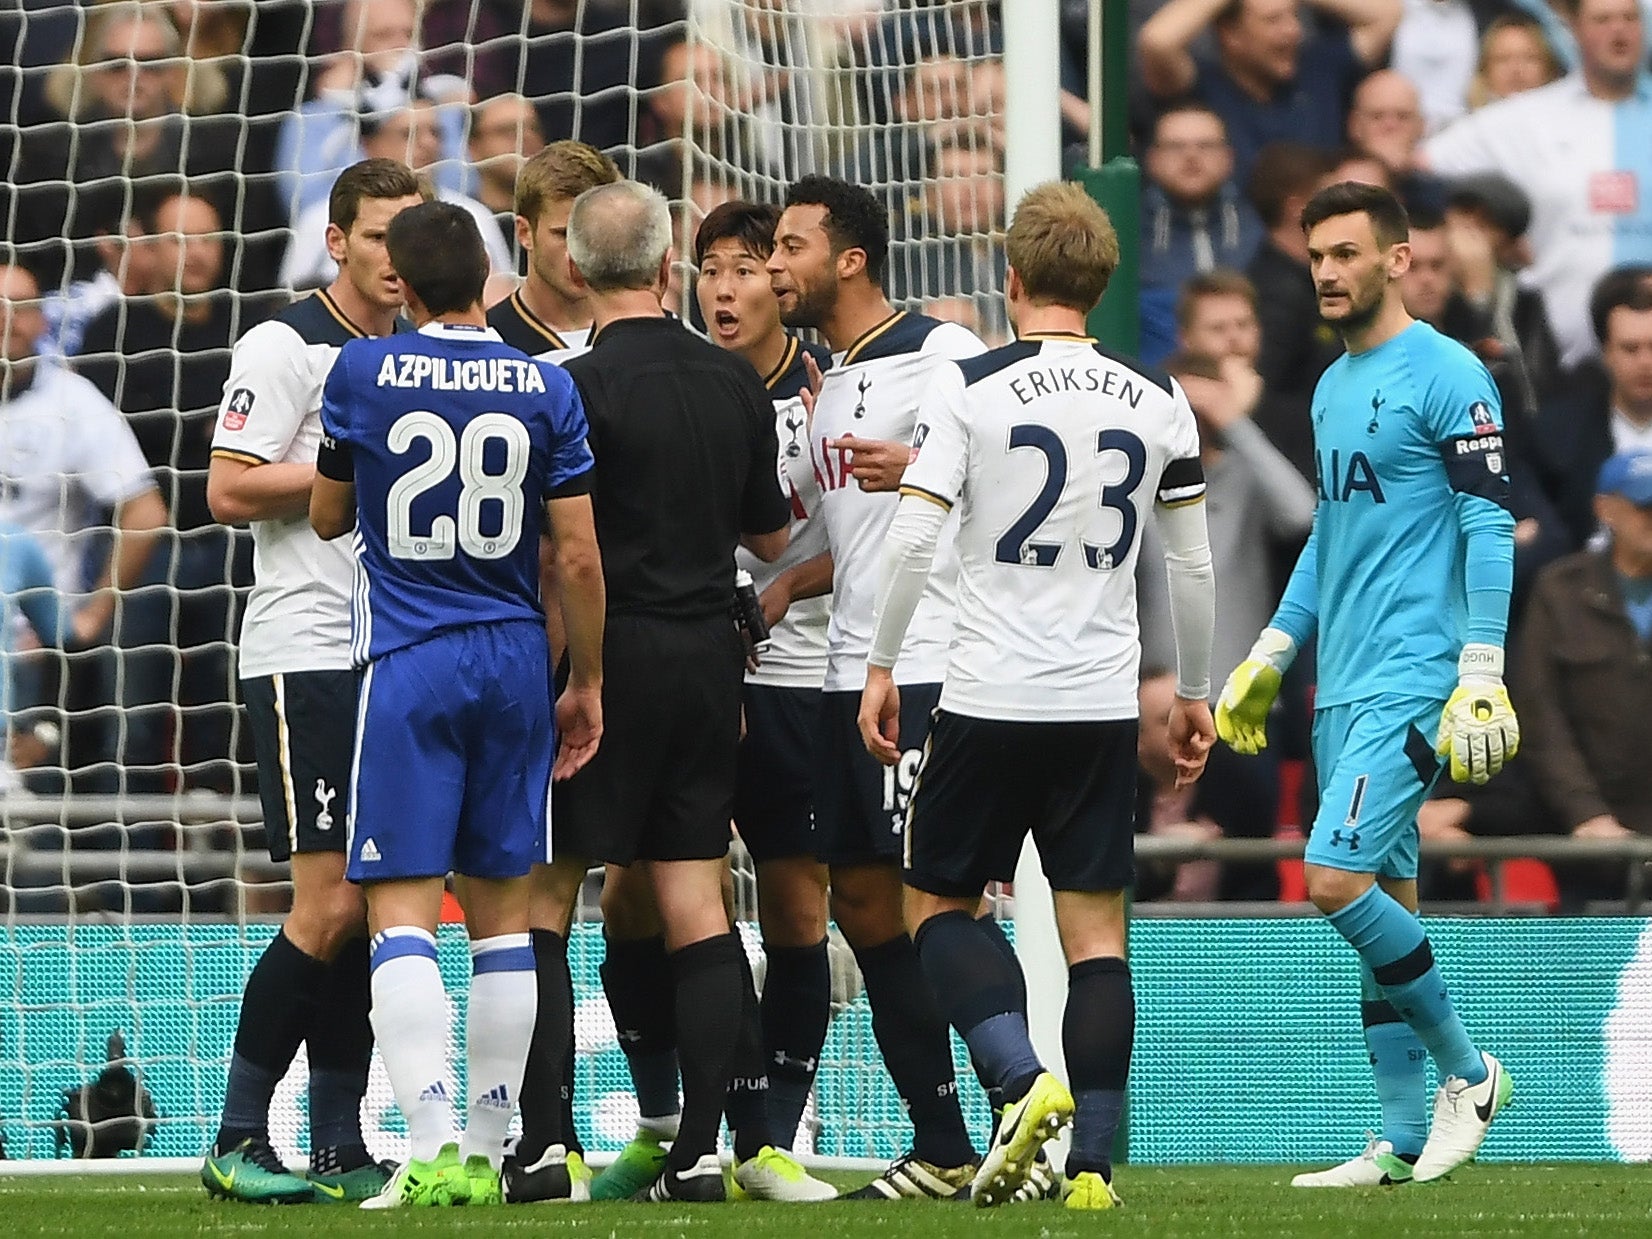 Chelsea and Spurs have a fiery history